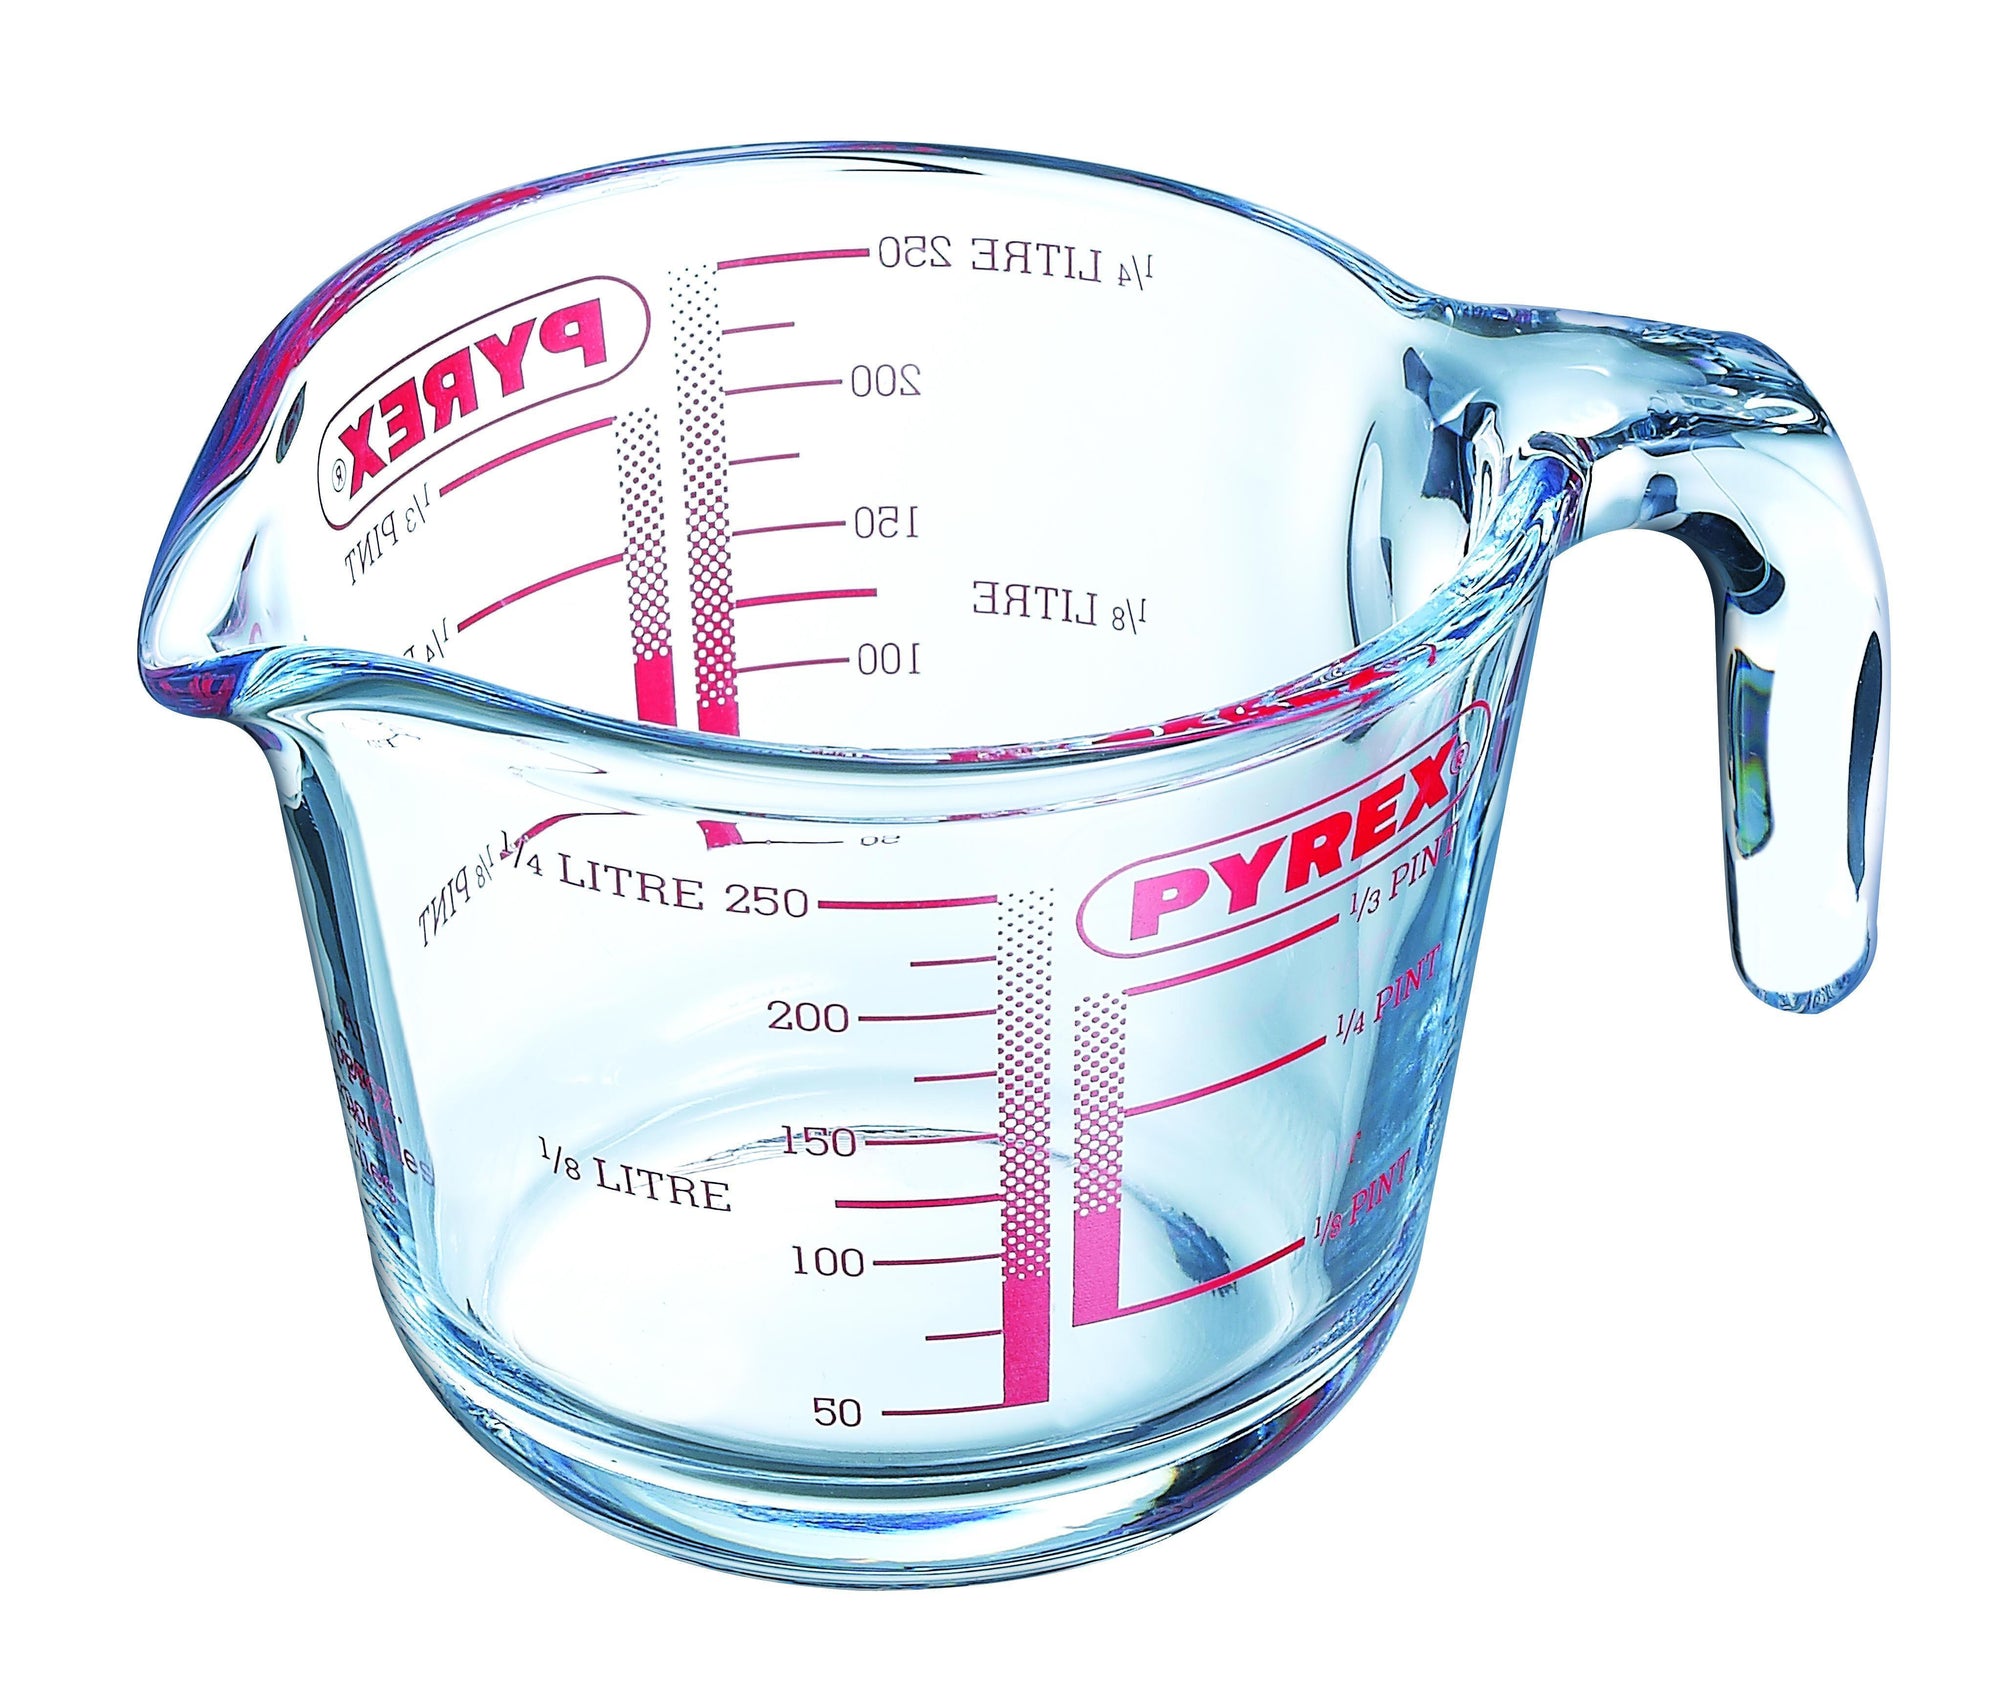 Pyrex 2 Cups/1/2 Liter Glass Measuring Cup Made in USA 